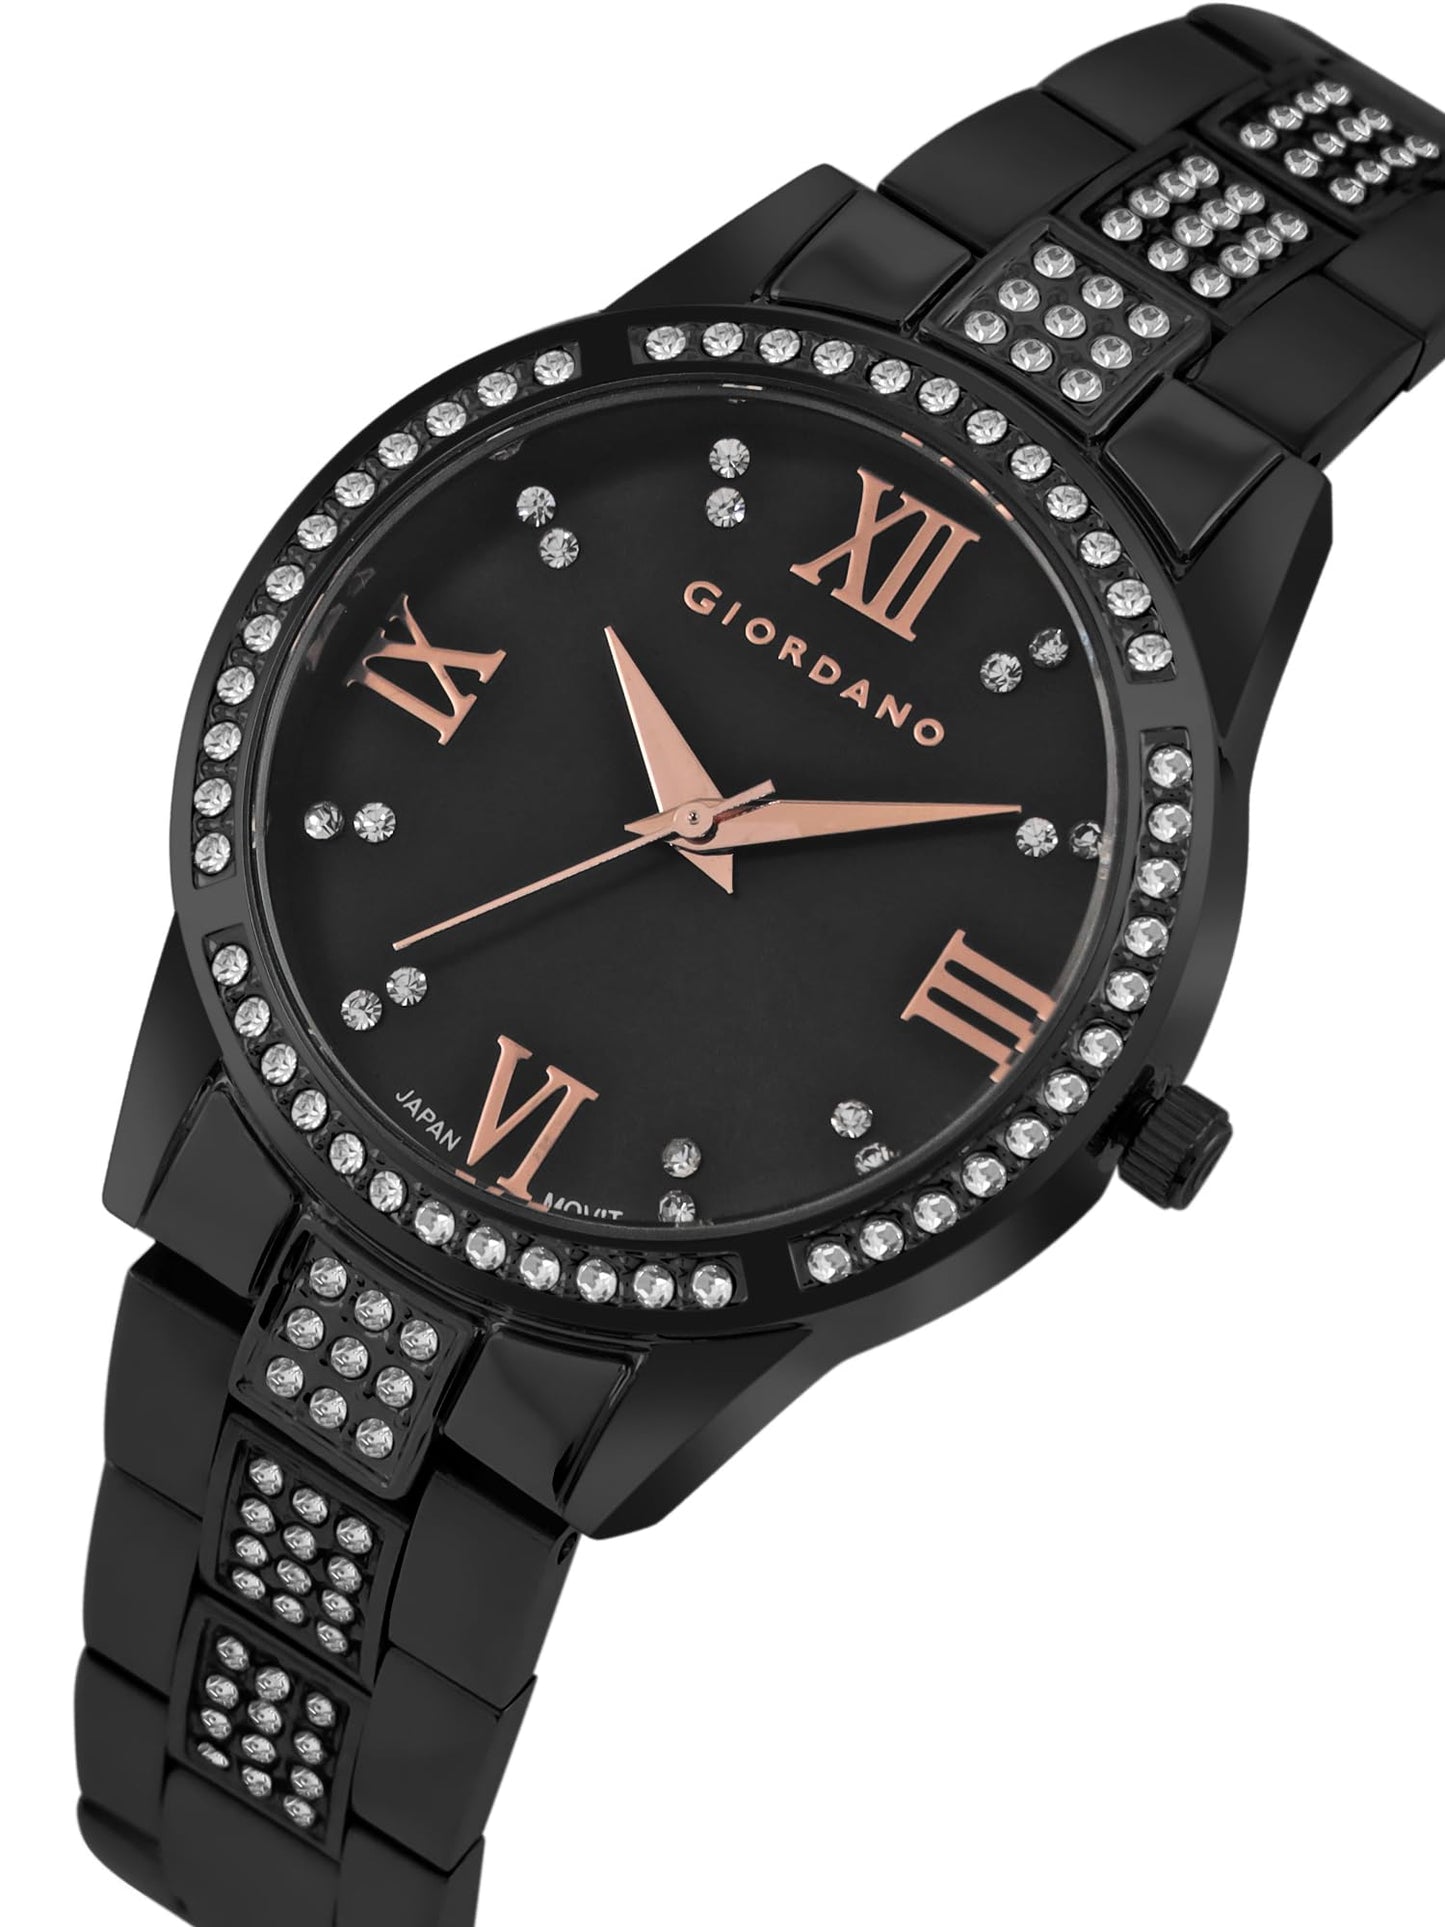 Giordano Analog Stylish Watch for Women Water Resistant Fashion Watch Round Shape with 3 Hand Mechanism Wrist Watch to Compliment Your Look/Ideal Gift for Female - GZ-60066